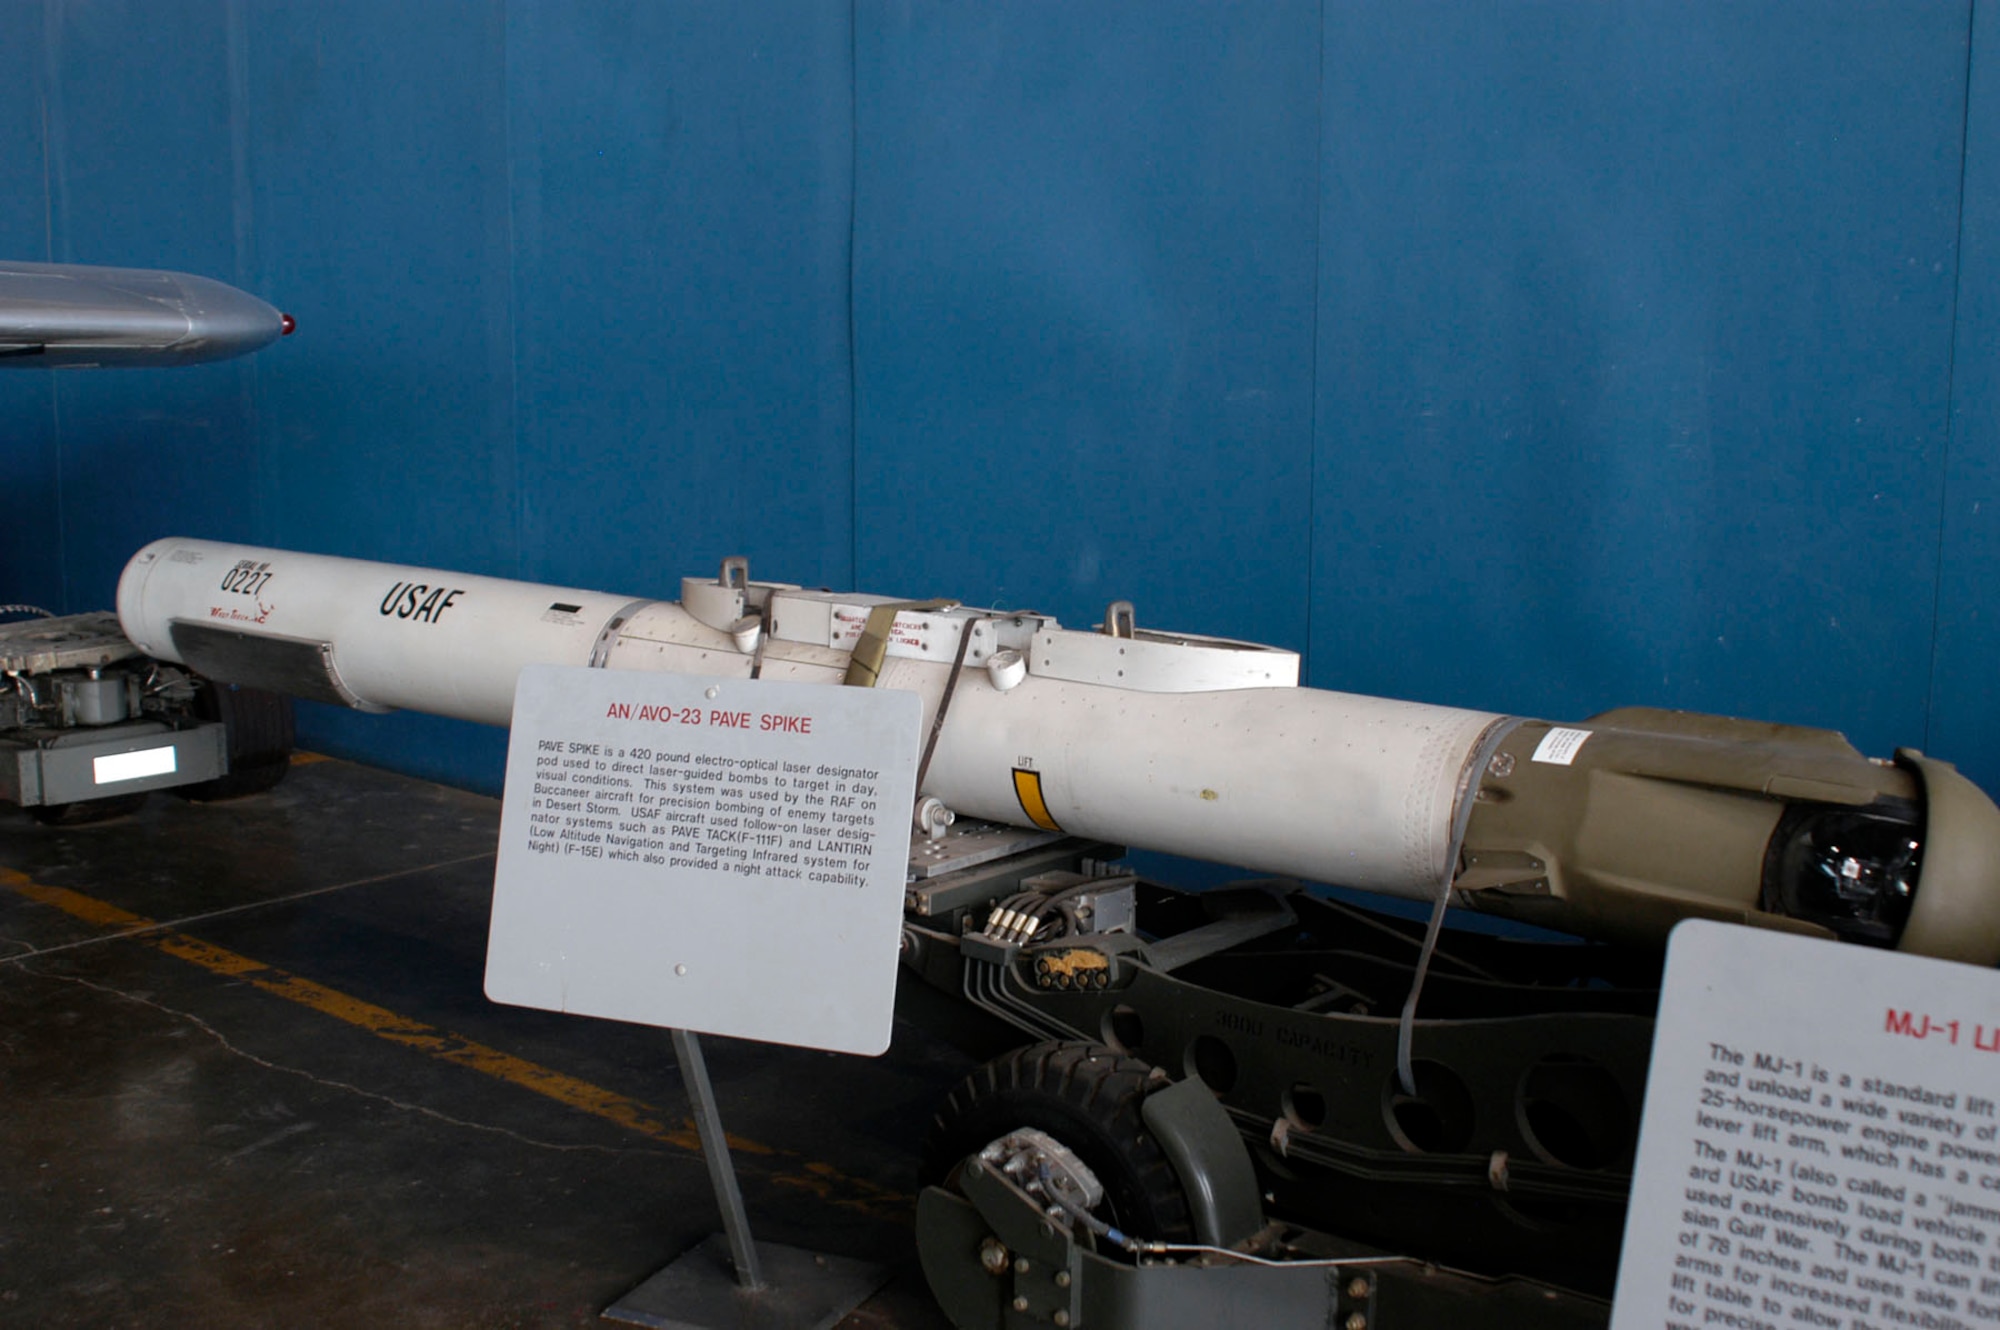 DAYTON, Ohio - The AN/AVQ-23 Pave Spike on display in the Research & Development Gallery at the National Museum of the U.S. Air Force. (U.S. Air Force photo)